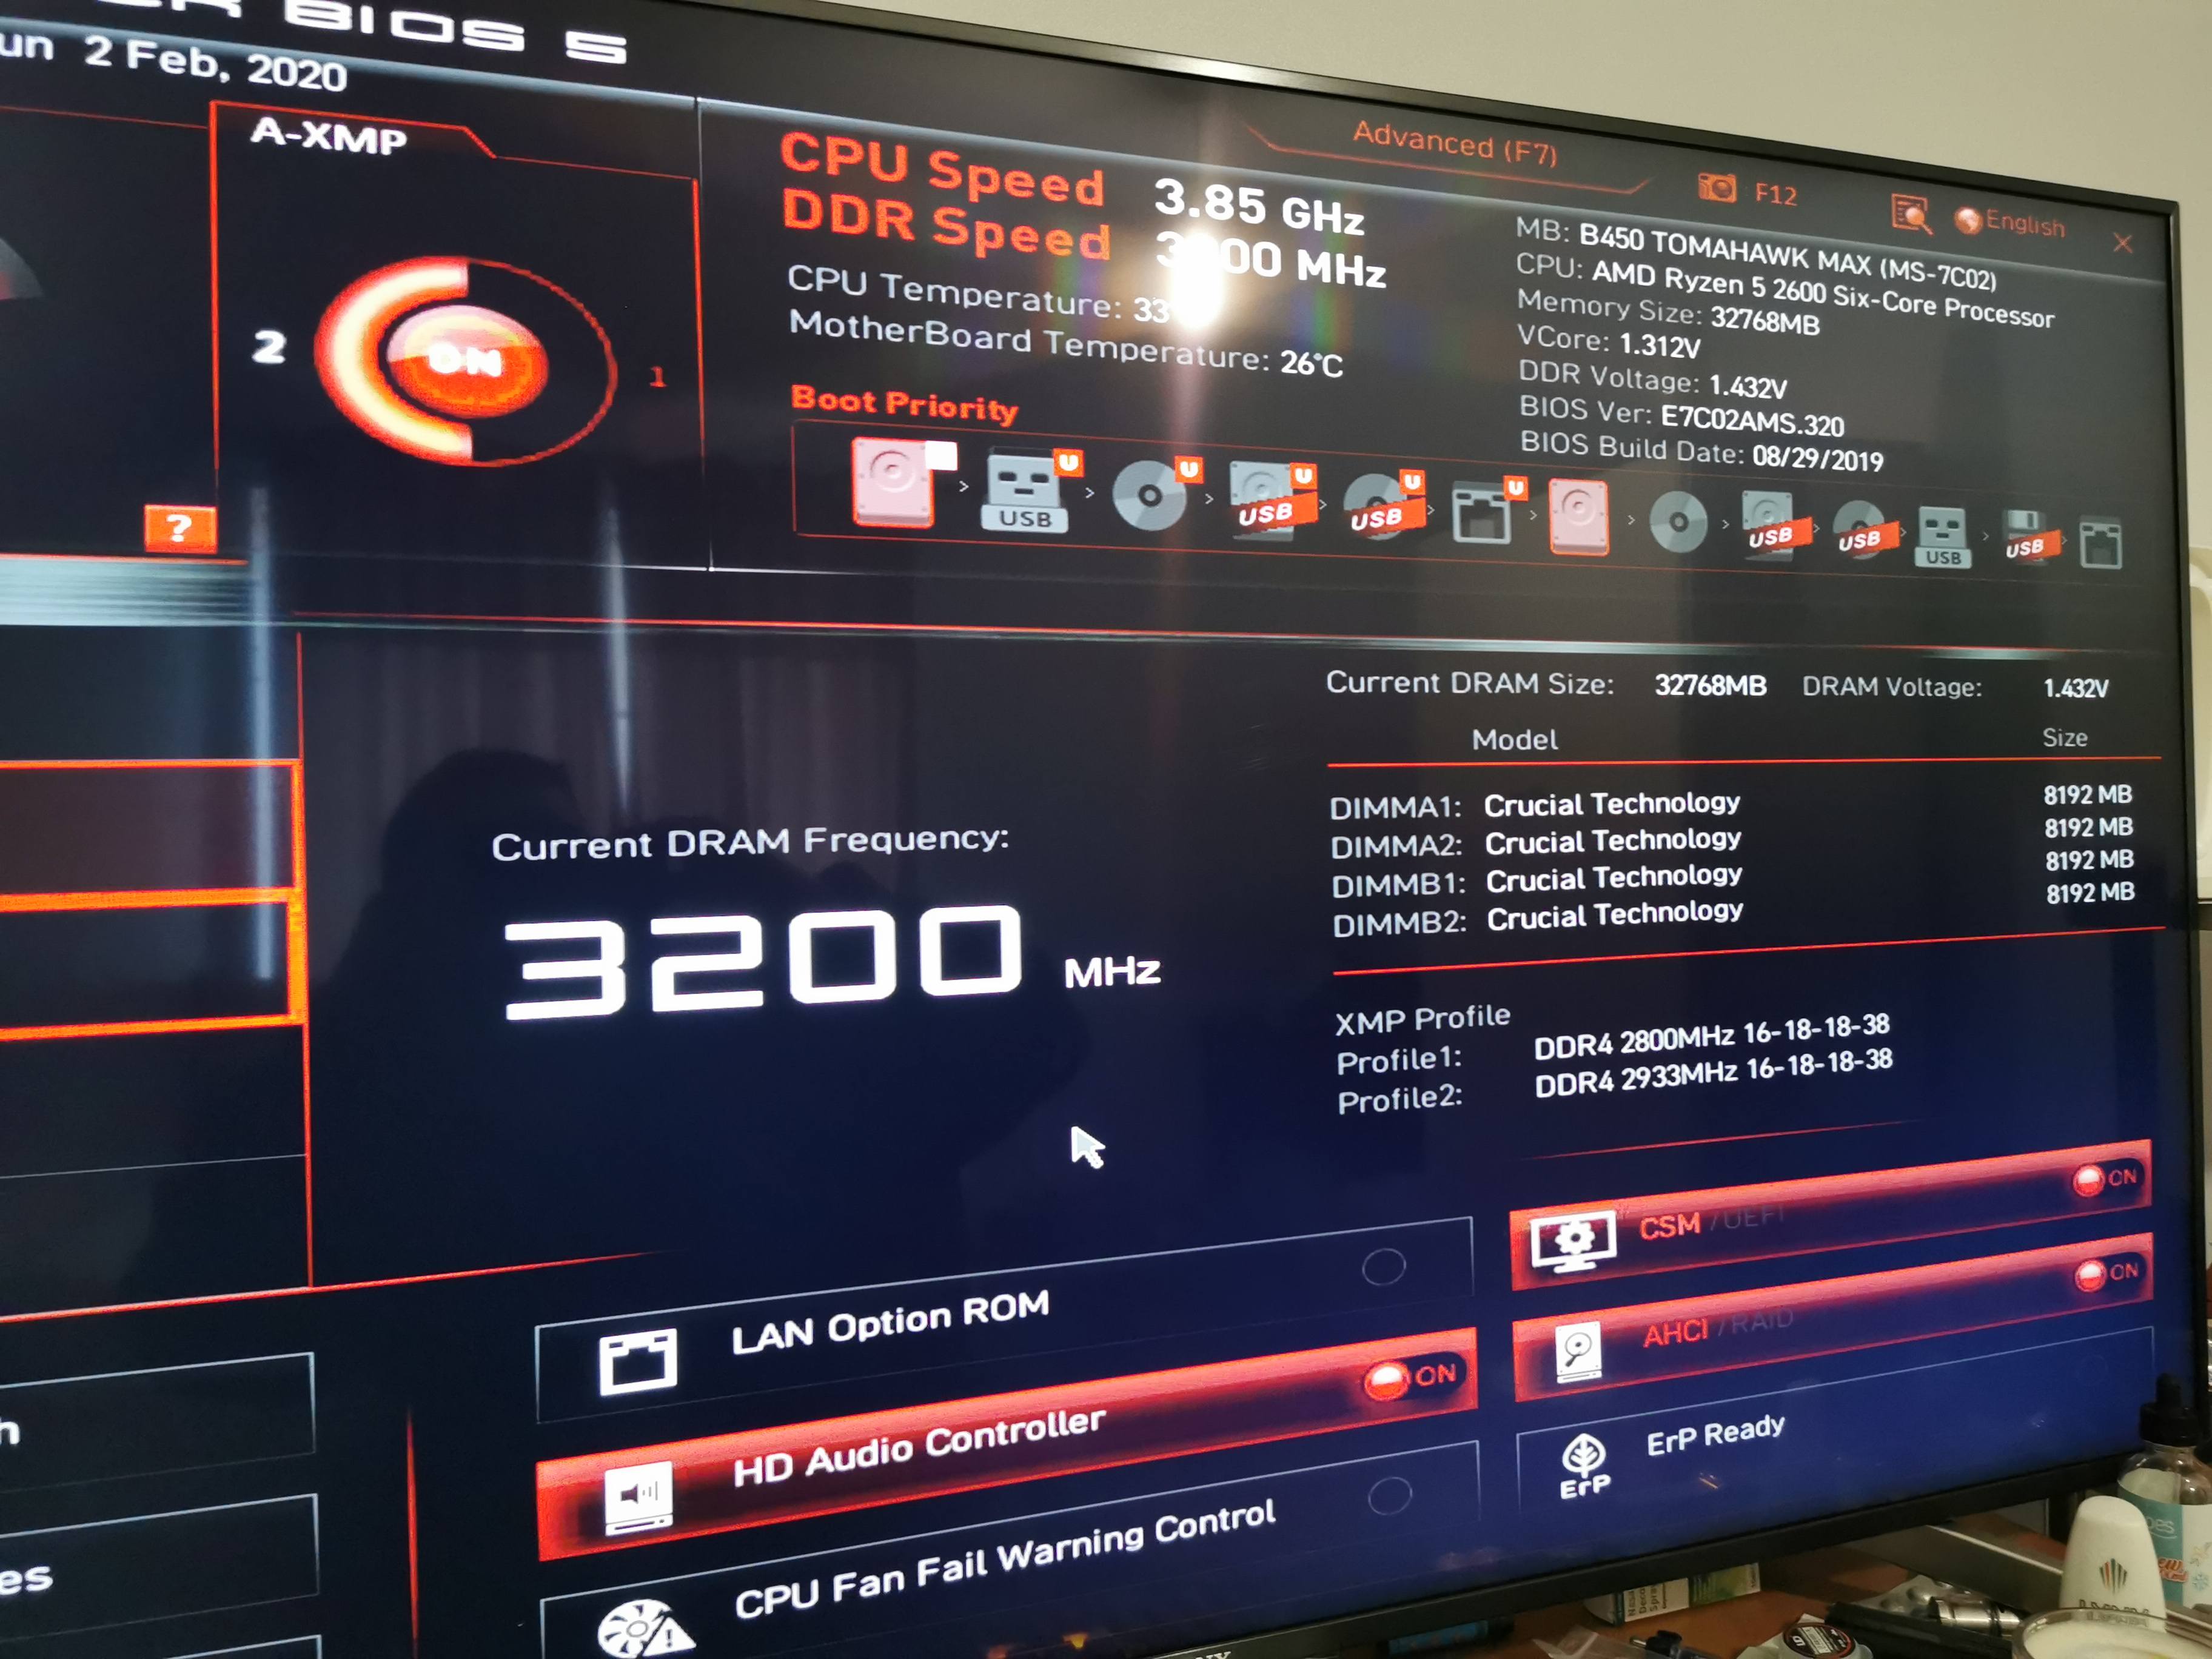 Mixing ram with ryzen 2600 b450 max - CPUs, Motherboards, and Memory - Linus Tips